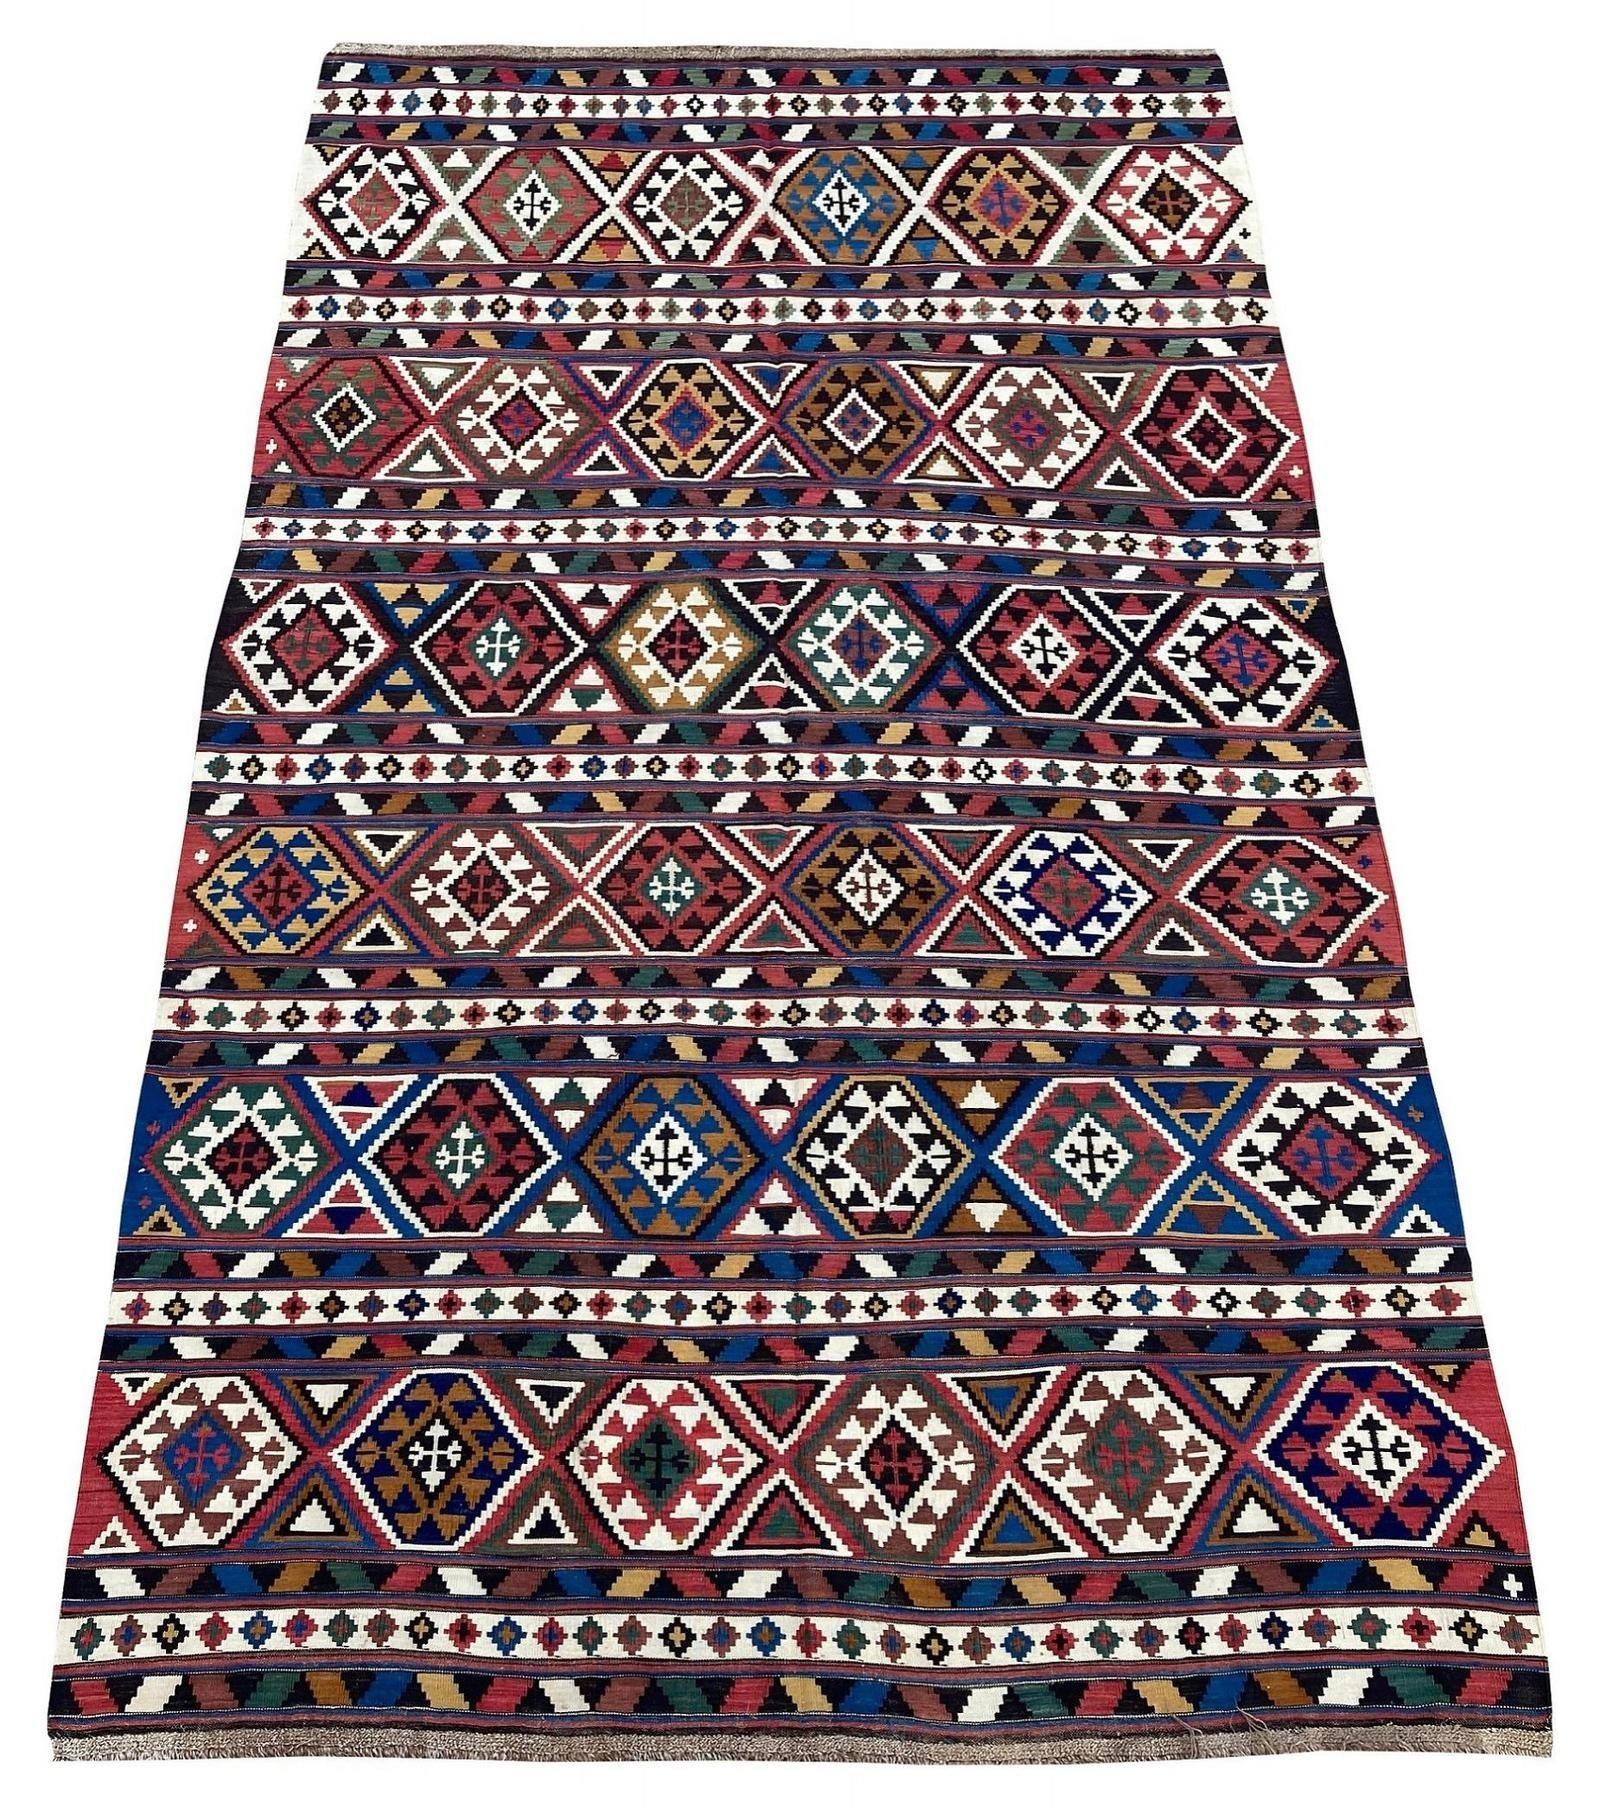 A stunning antique kilim, hand woven circa 1900 in or around Shirvan in what is now south-east Azerbaidjan. The kilim has been finely woven in a traditional banded design of hooked medallions with fabulous colours.
Size: 3.33m x 1.96m (10ft 11in x